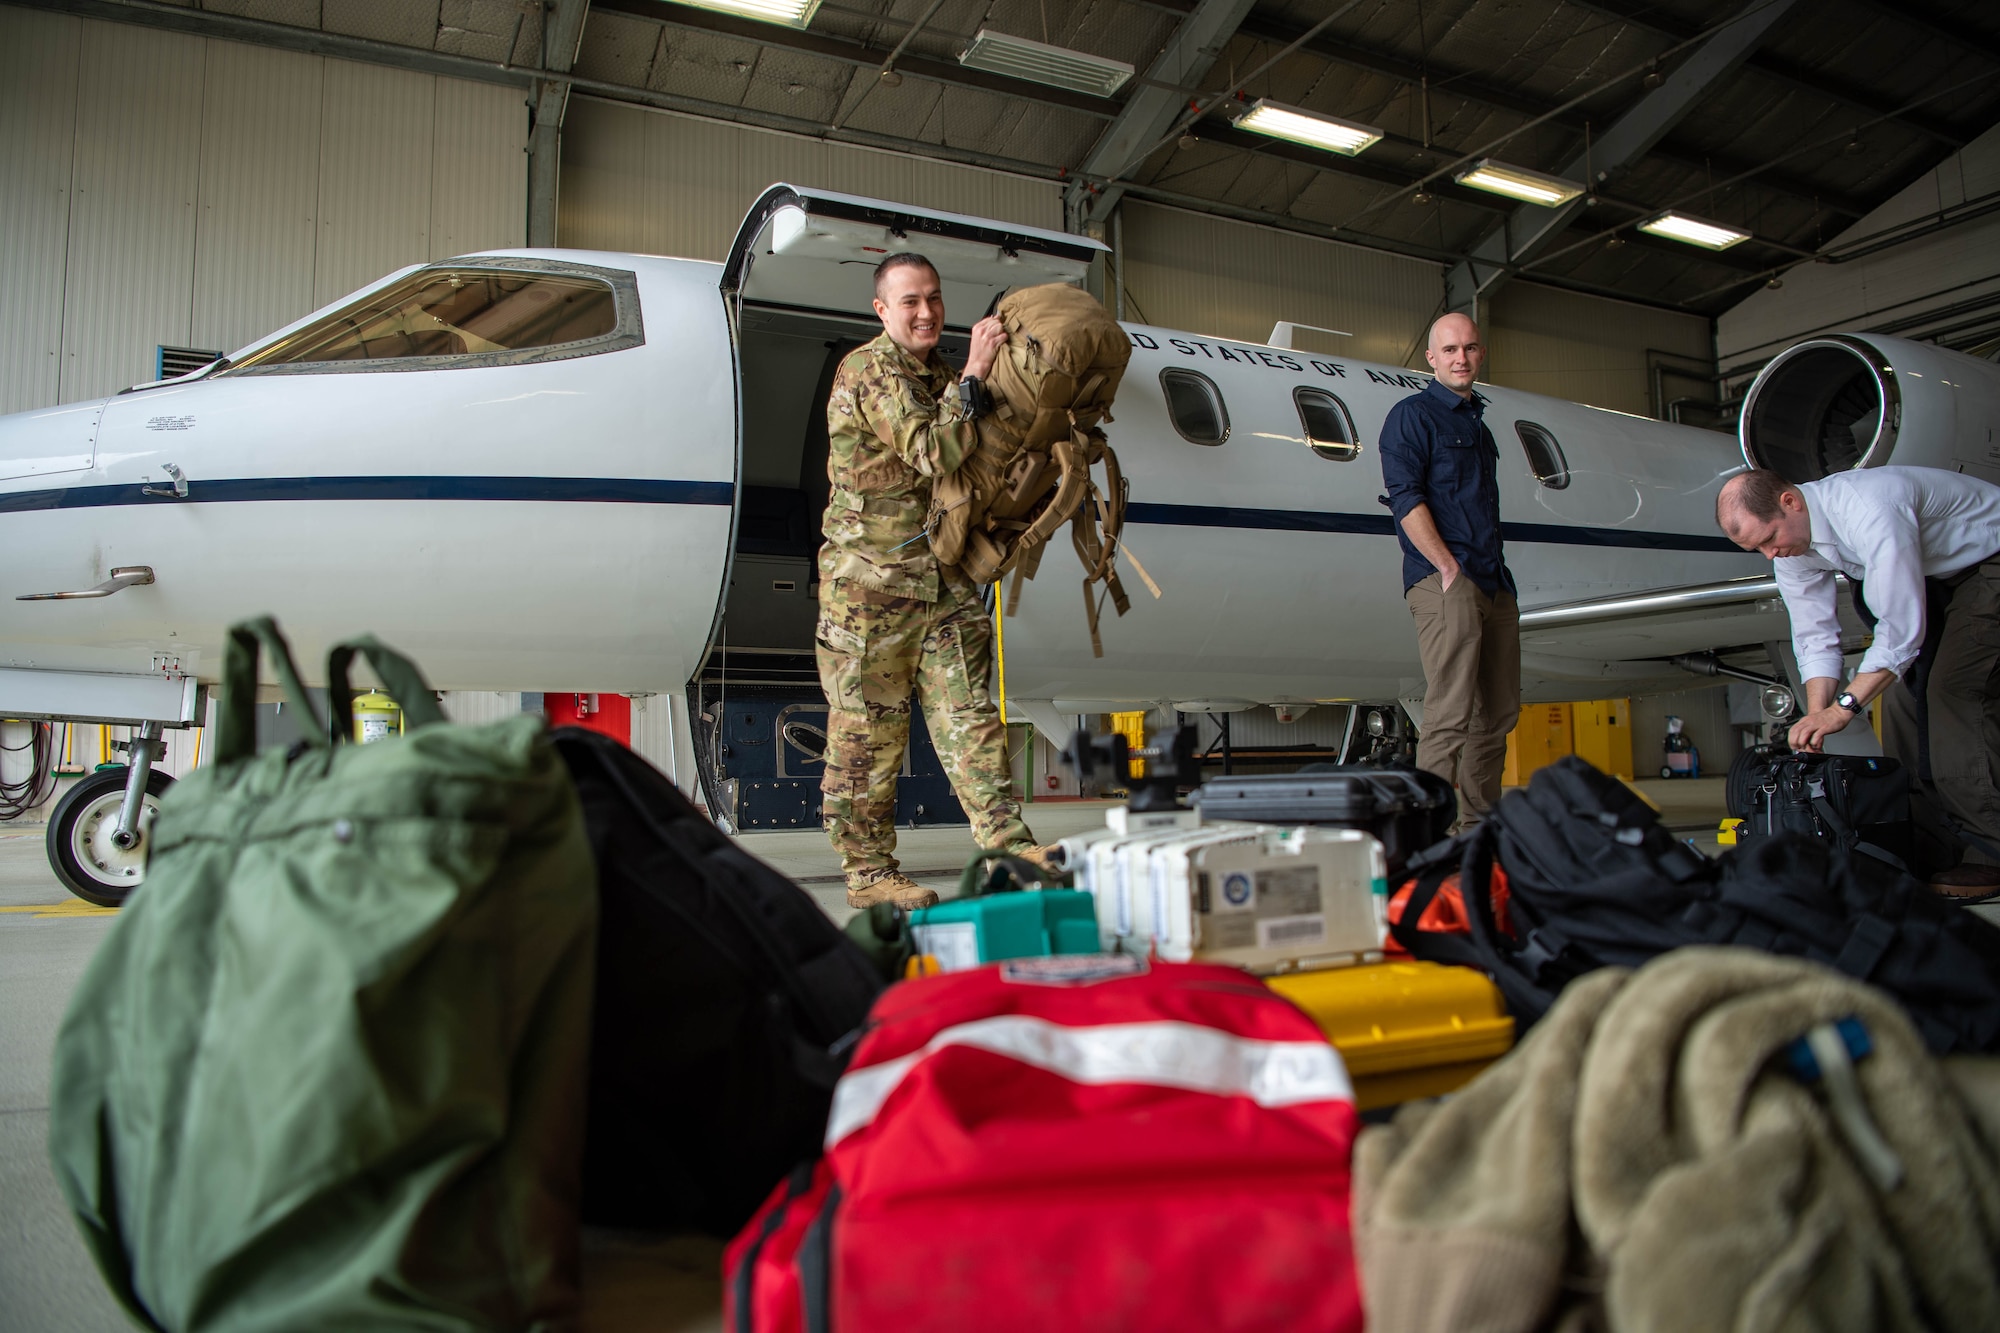 Ramstein airmen respond to real medical emergency during basewide